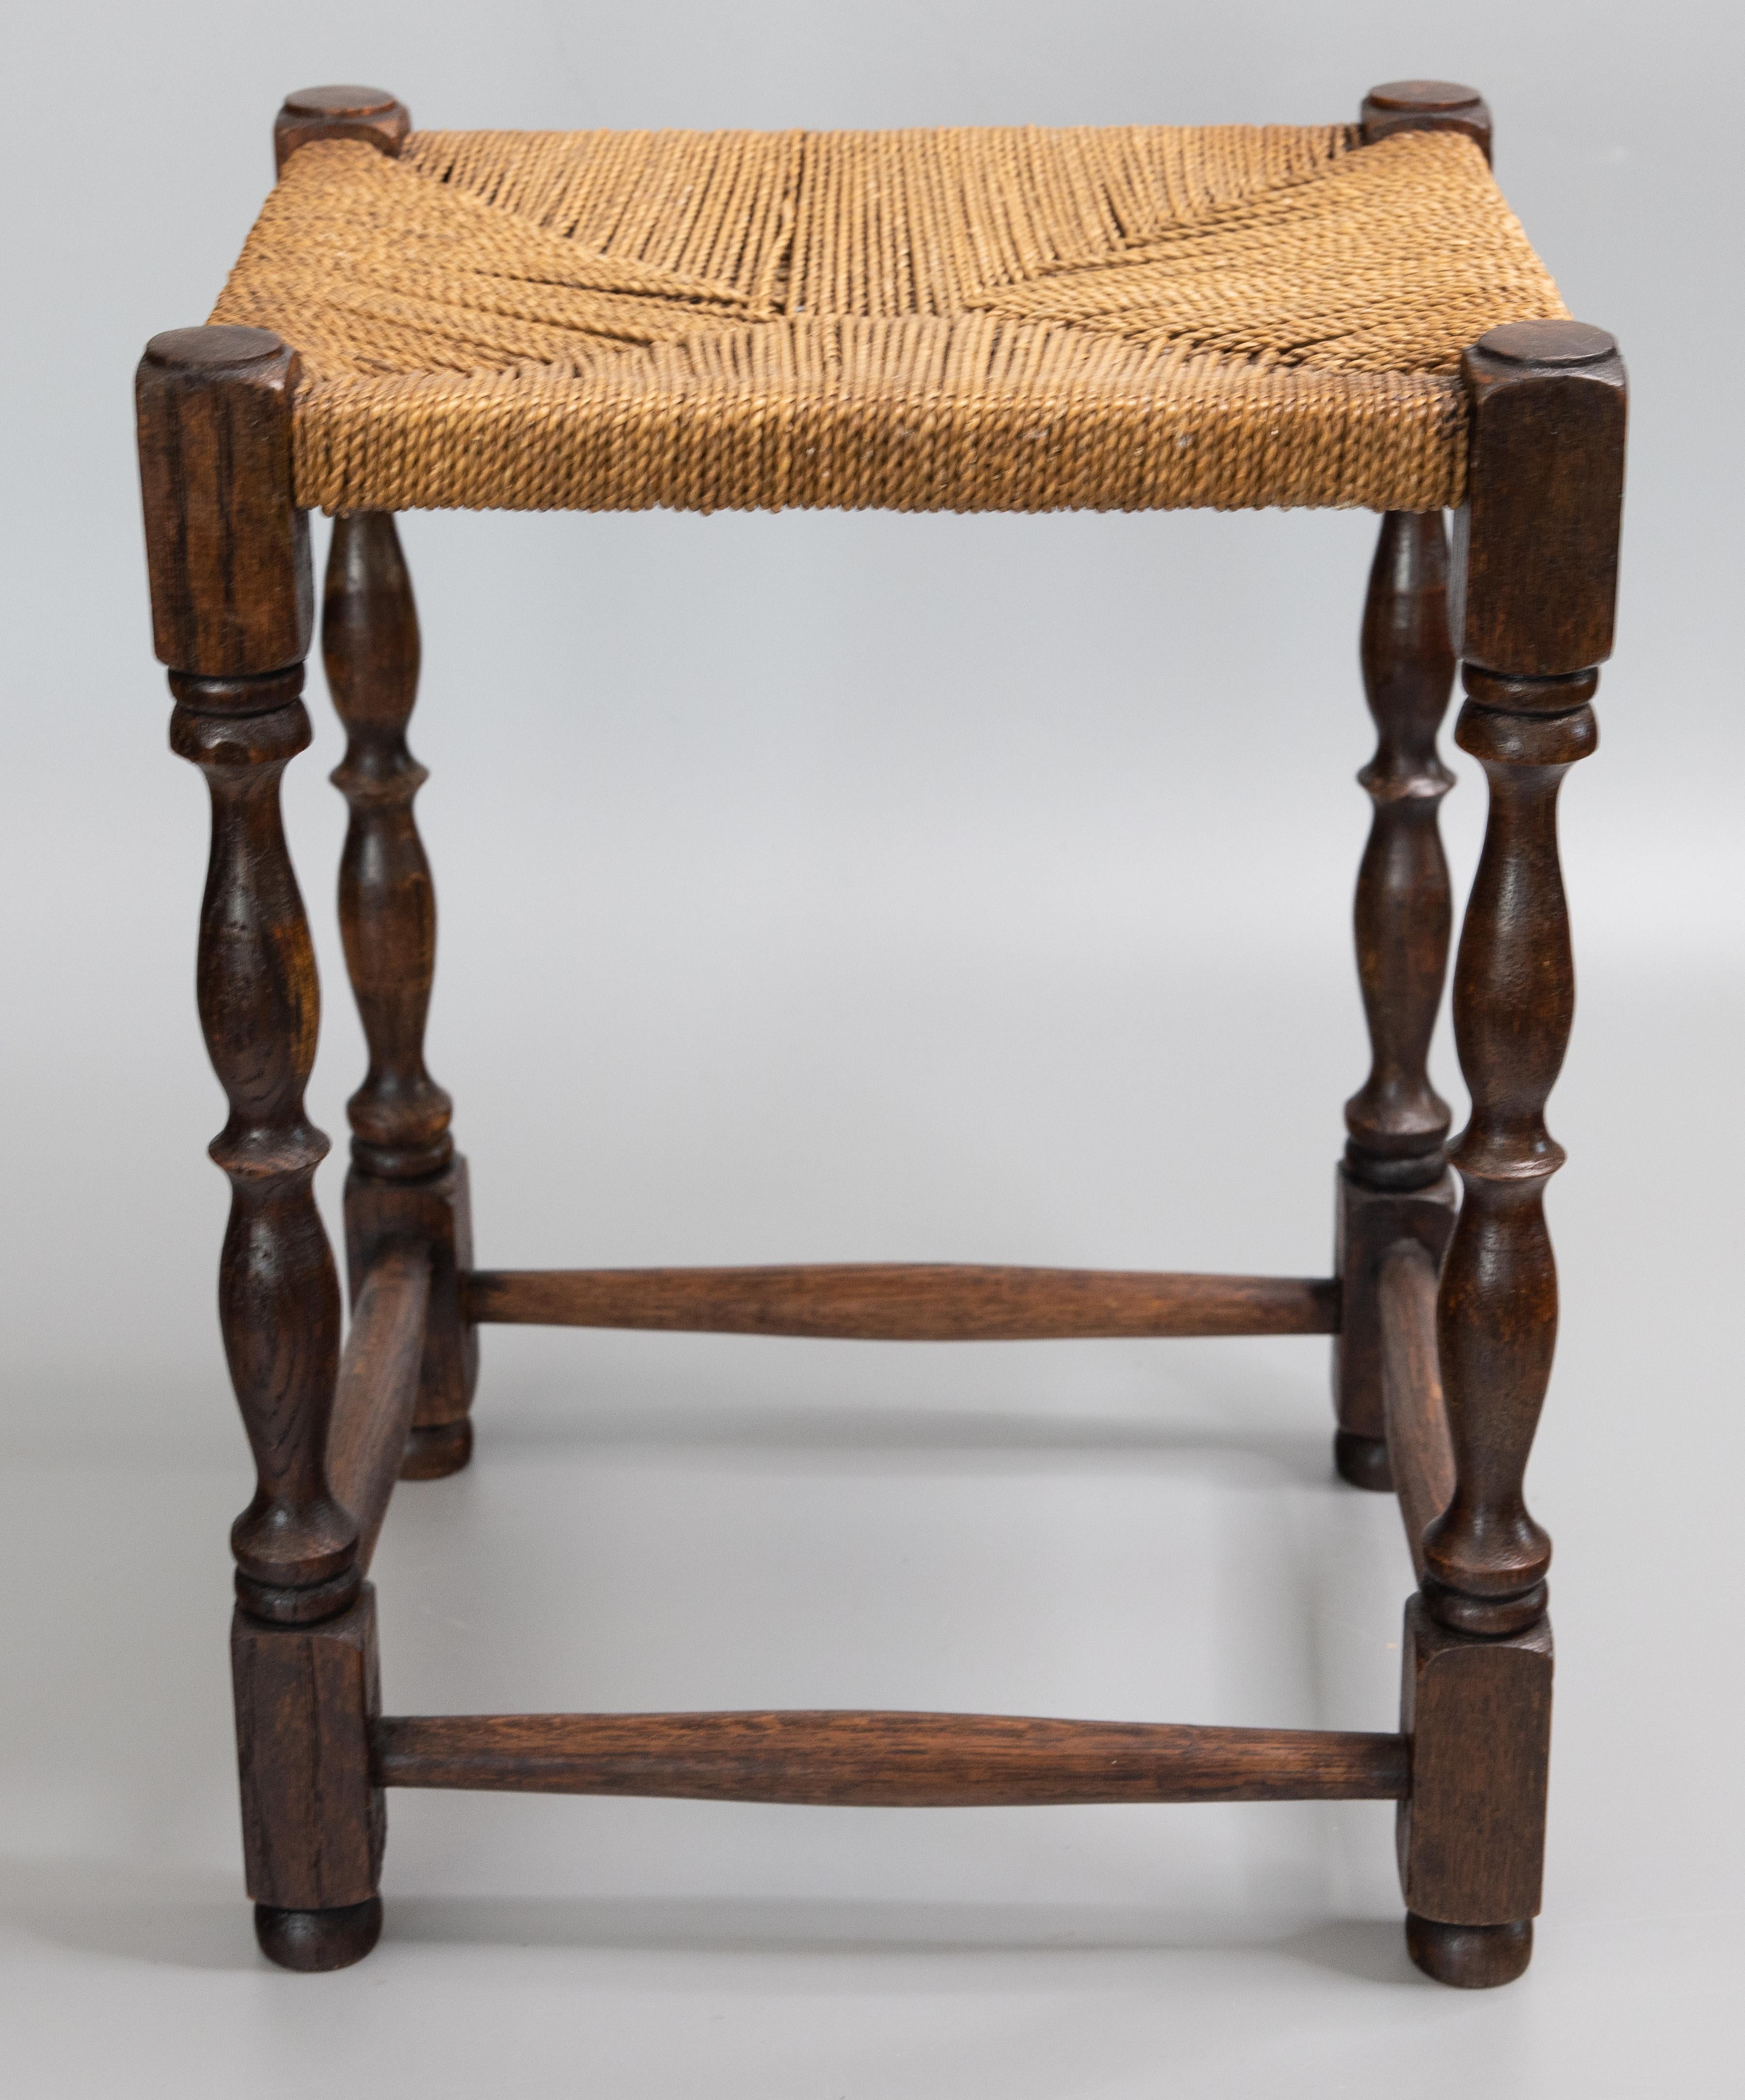 A superb English oak stool / footstool with hand turned legs and stretchers and hand woven corded string seat, circa 1900. This charming stool would make a wonderful foot rest or a small drinks table with a tray on top.

DIMENSIONS
13.75ʺW × 12.25ʺD